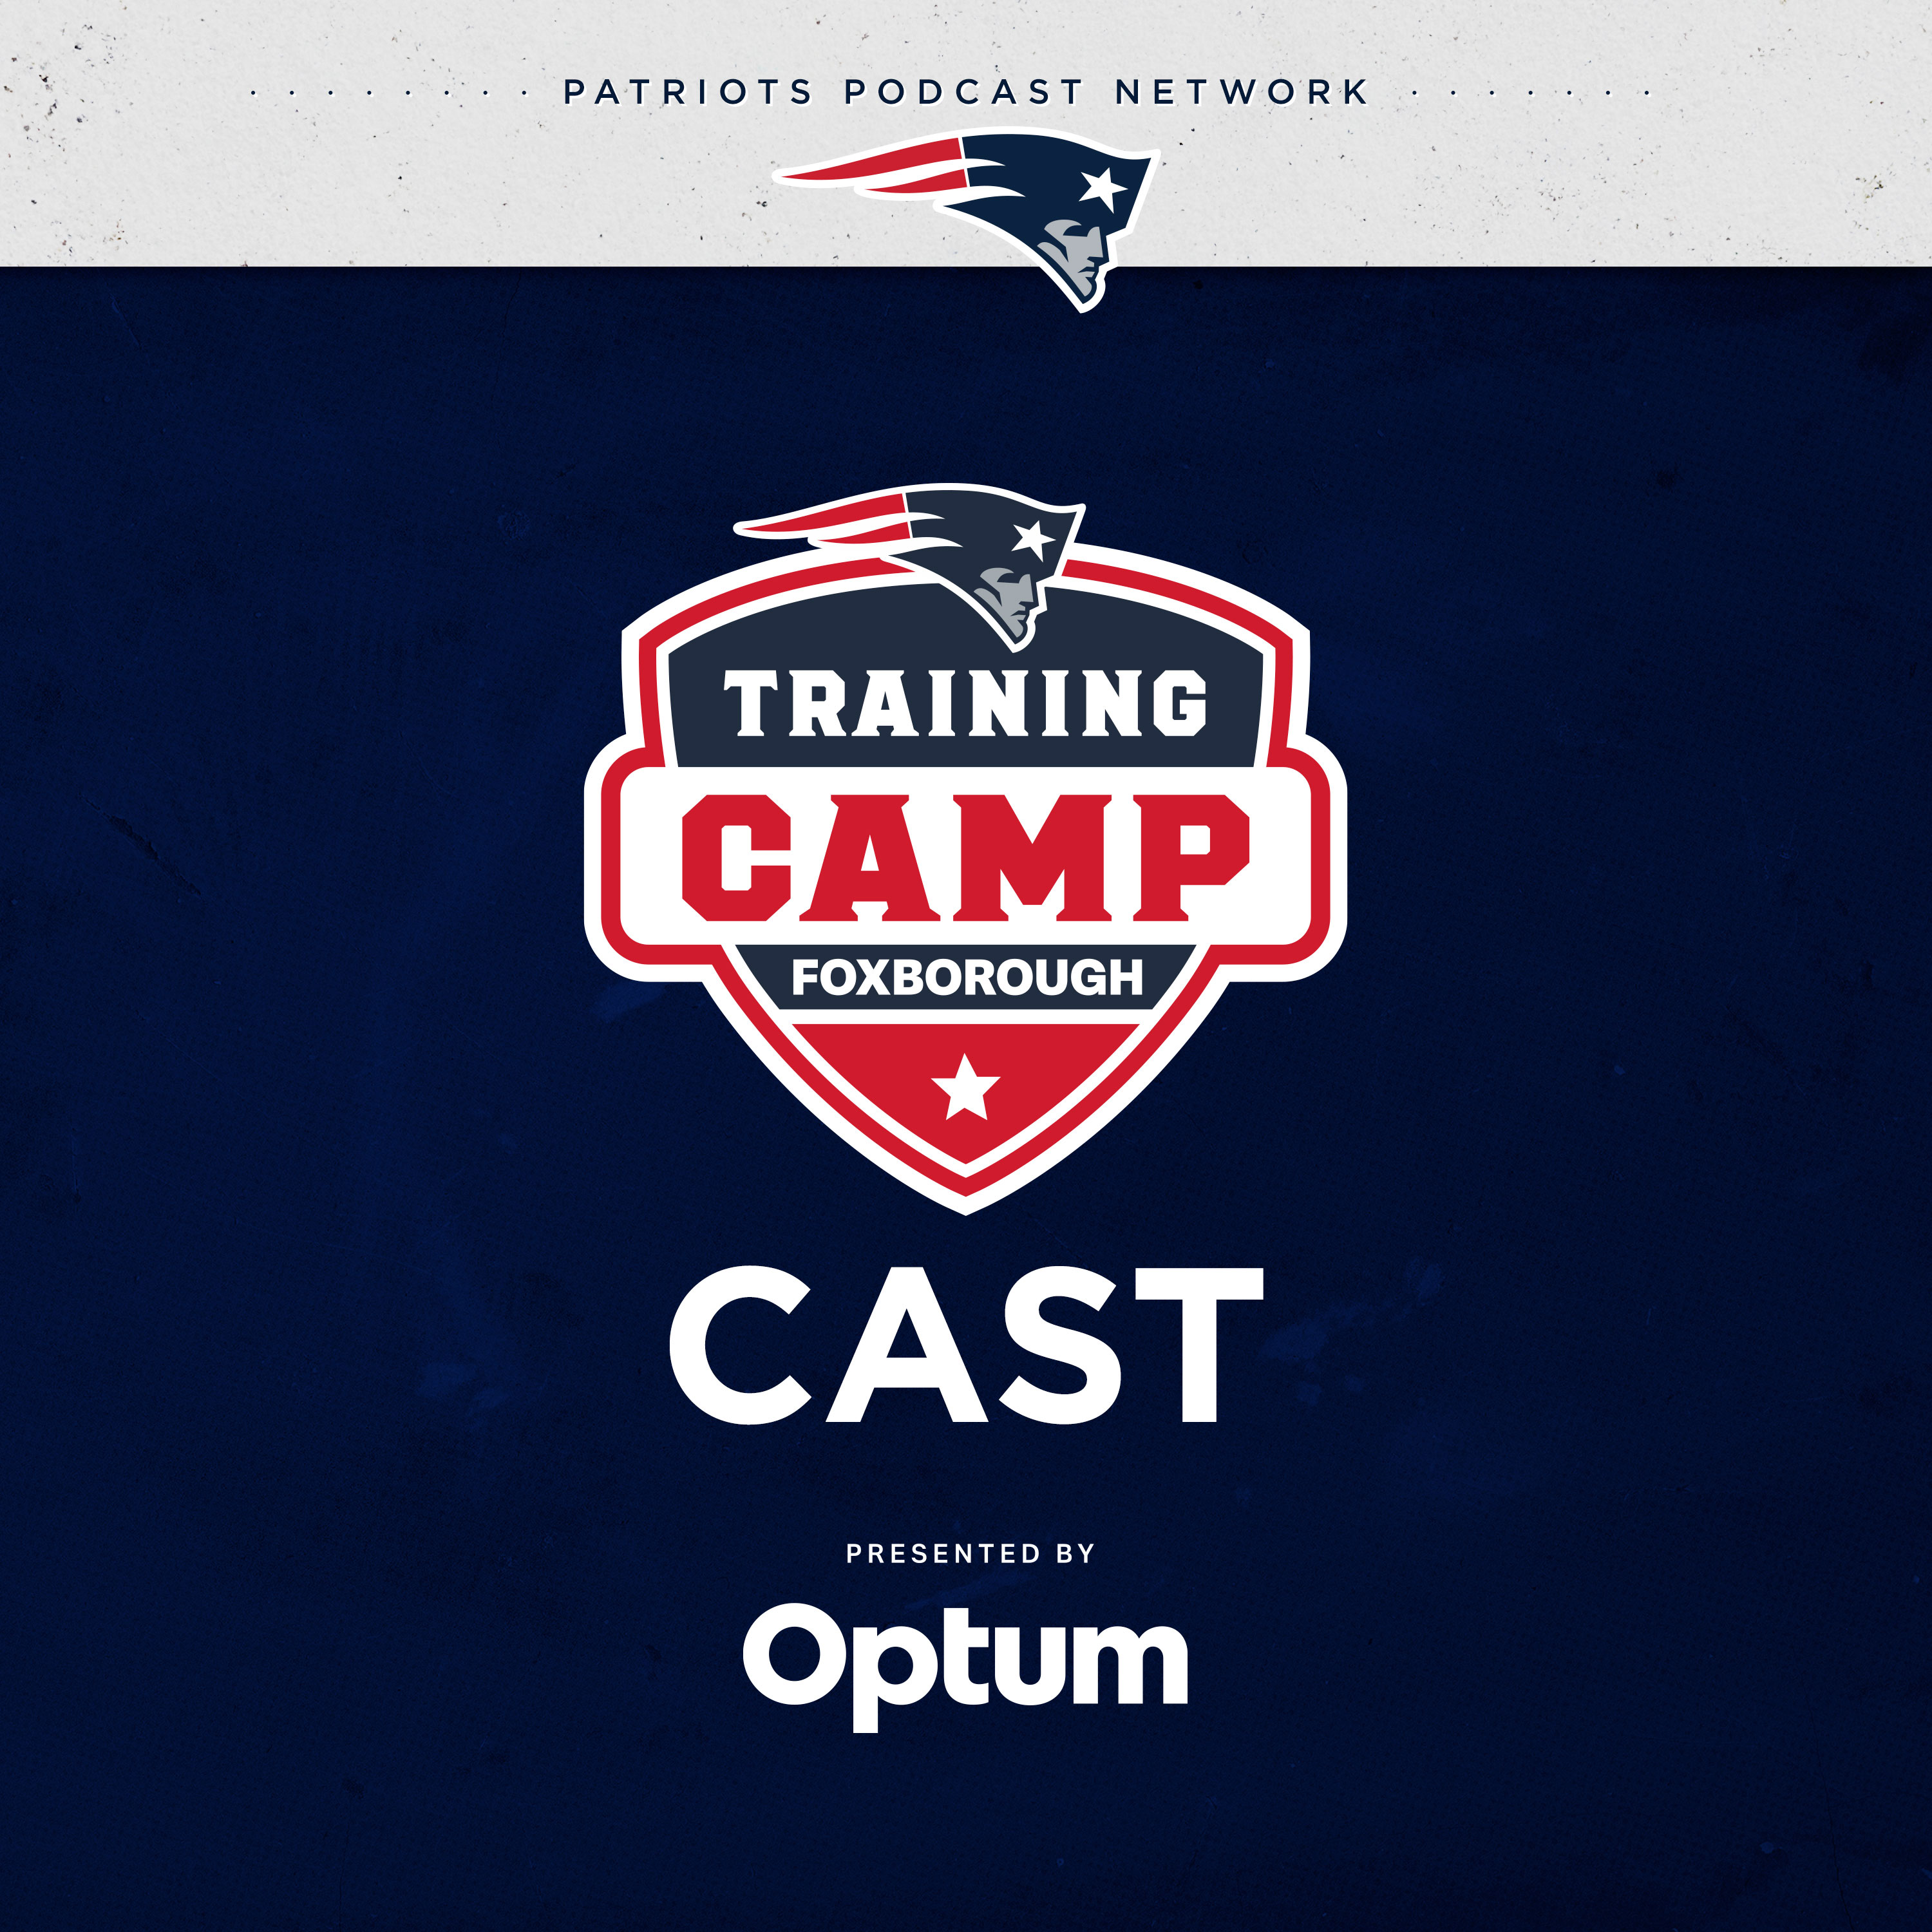 Training Camp Cast 8/3: Day 8 Recap, Offensive Continues Progress, Defense Pushes Back